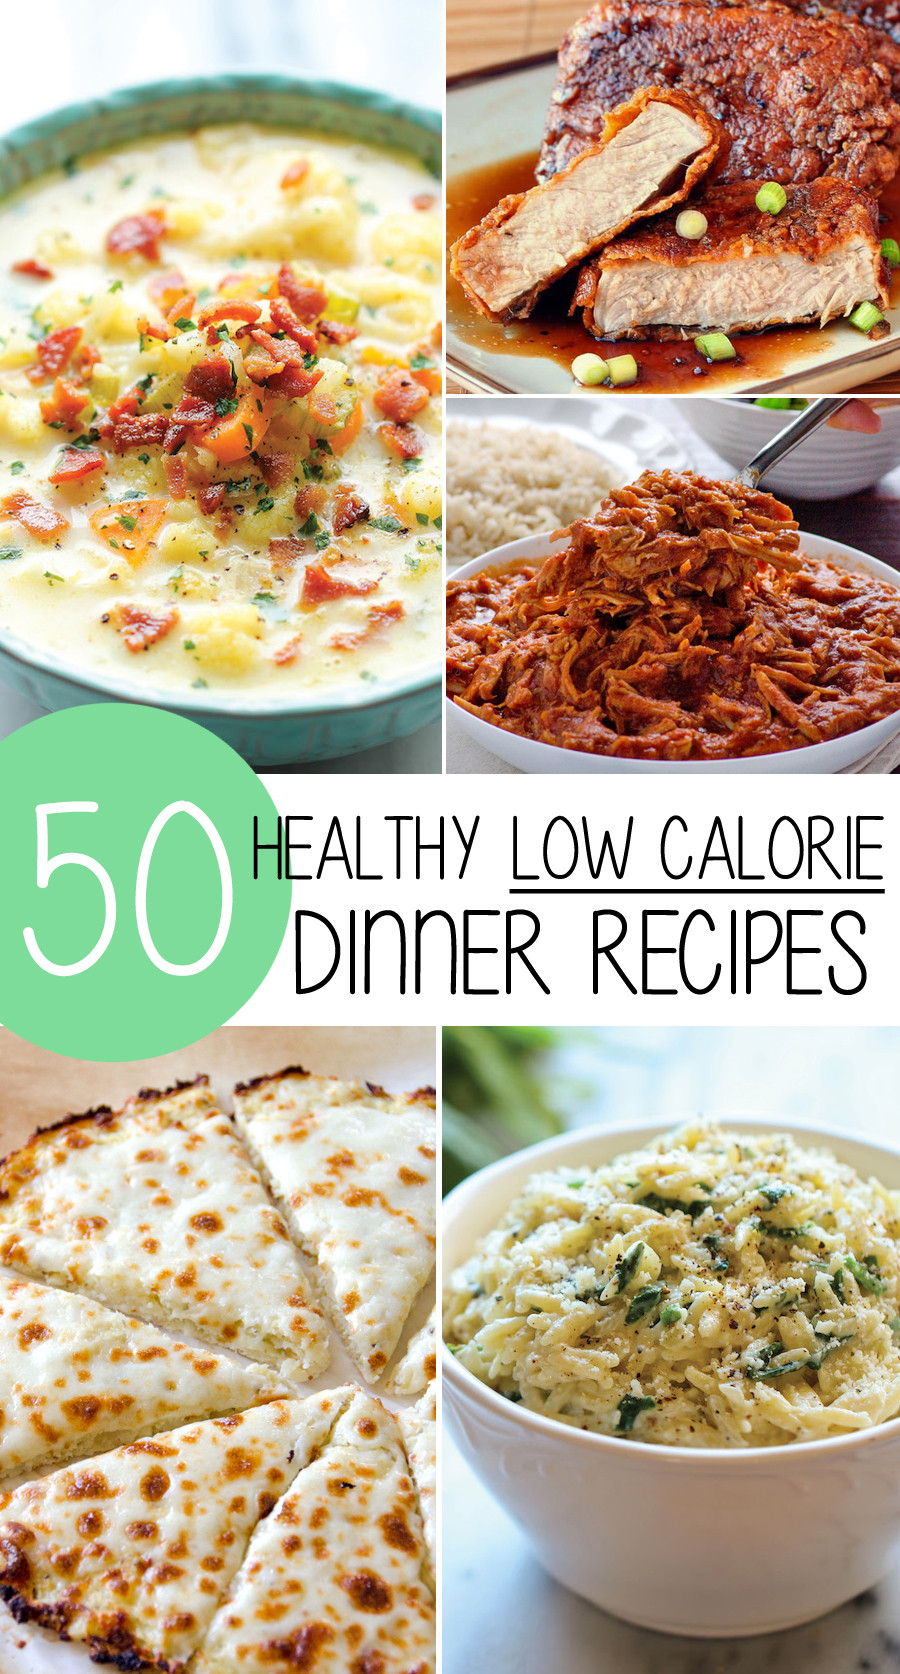 Low Calorie Recipes For Dinner
 50 Healthy Low Calorie Weight Loss Dinner Recipes